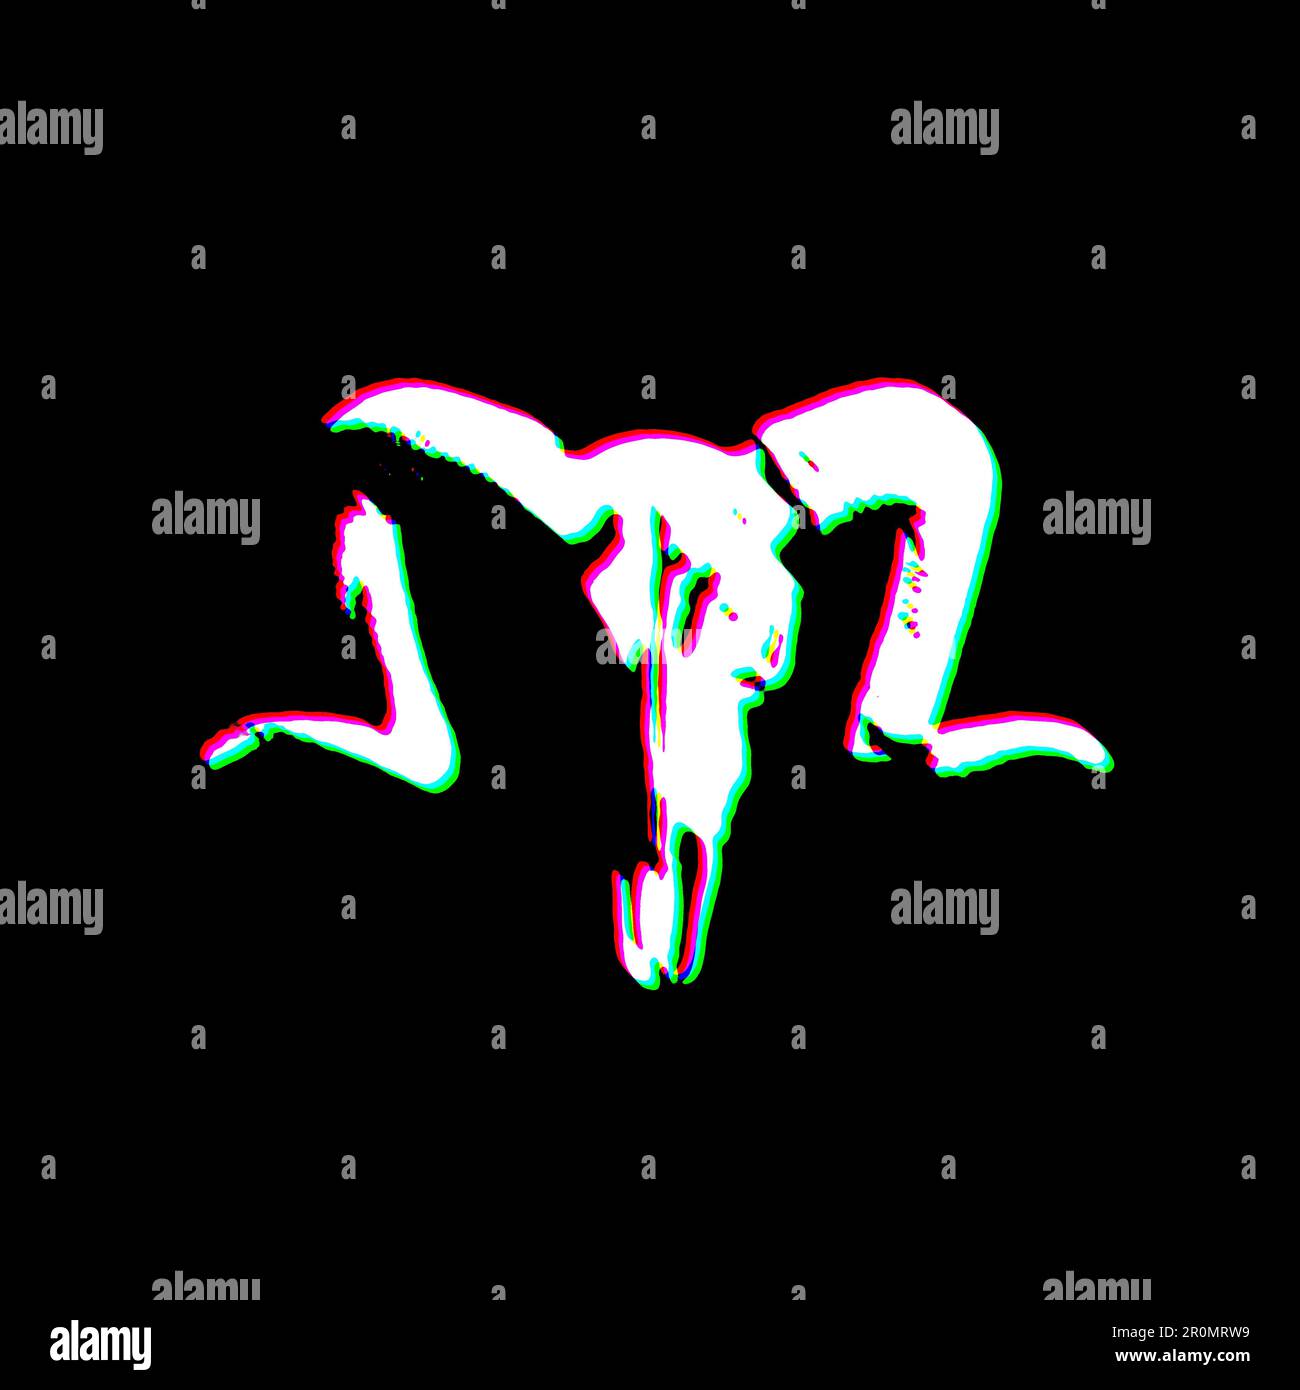 White Black Ram Skull Head Horn Grudge Scratched Dirty Style Punk Print Symbol illustration Stock Photo